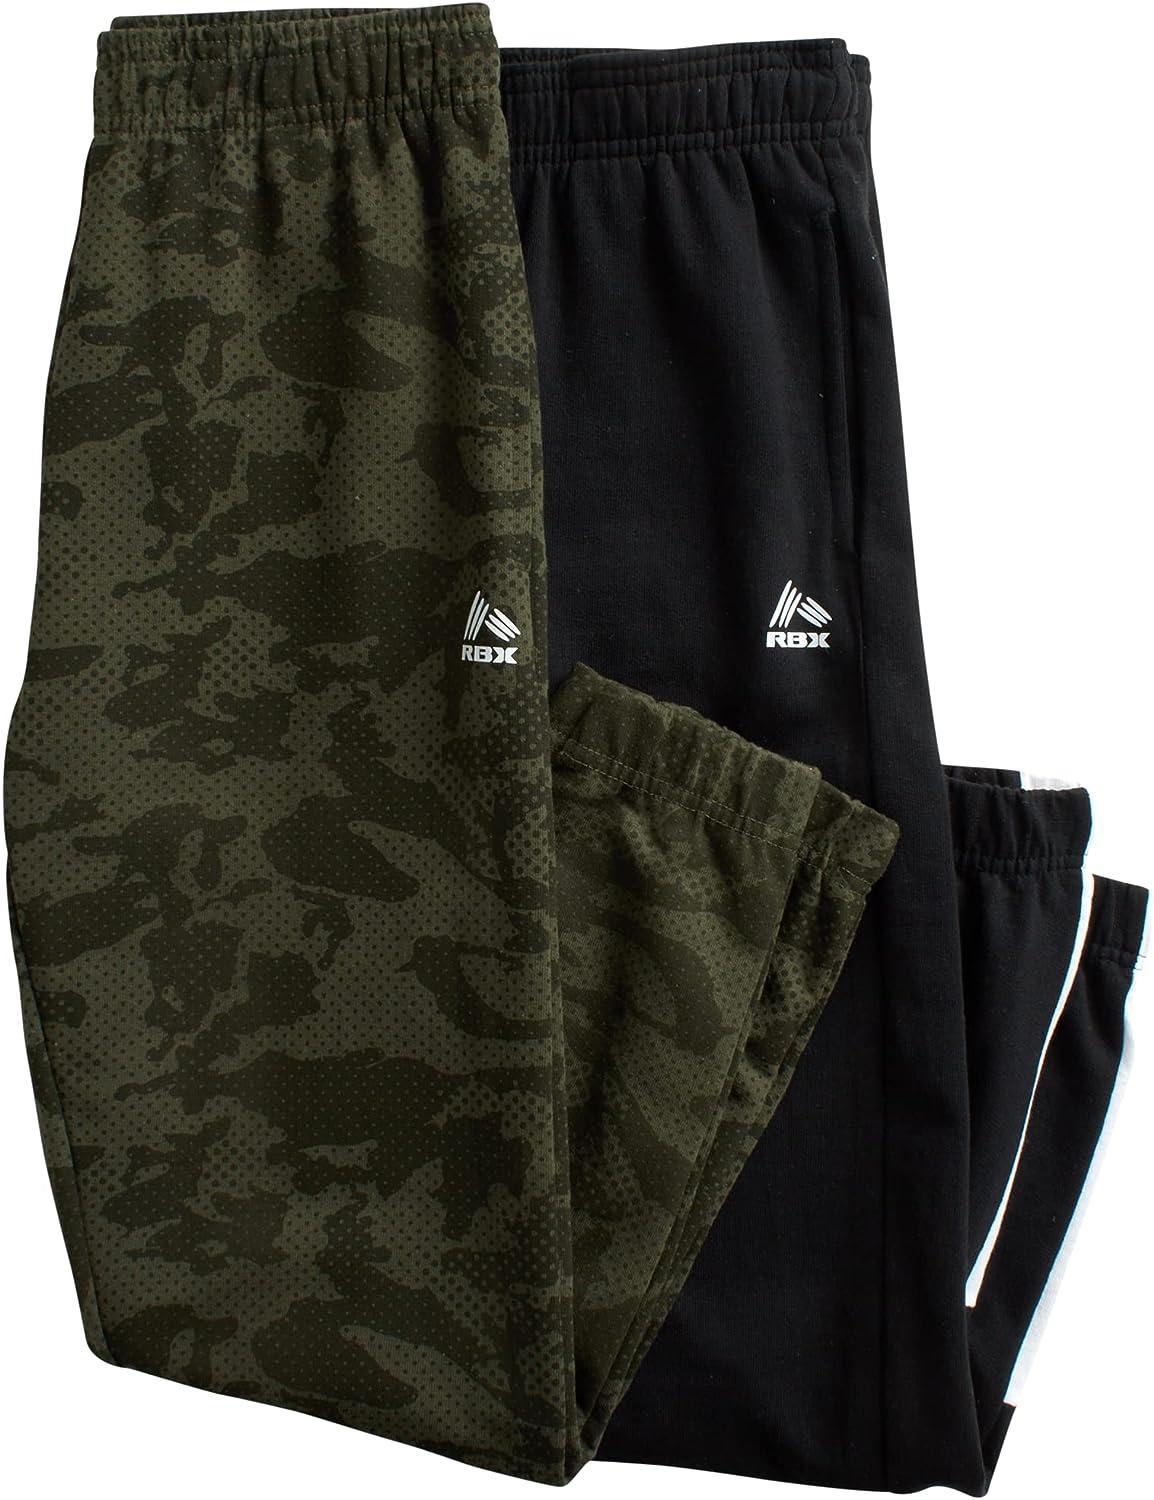 RBX Boys' Sweatpants - 4 Pack French Terry Active Jogger Pants